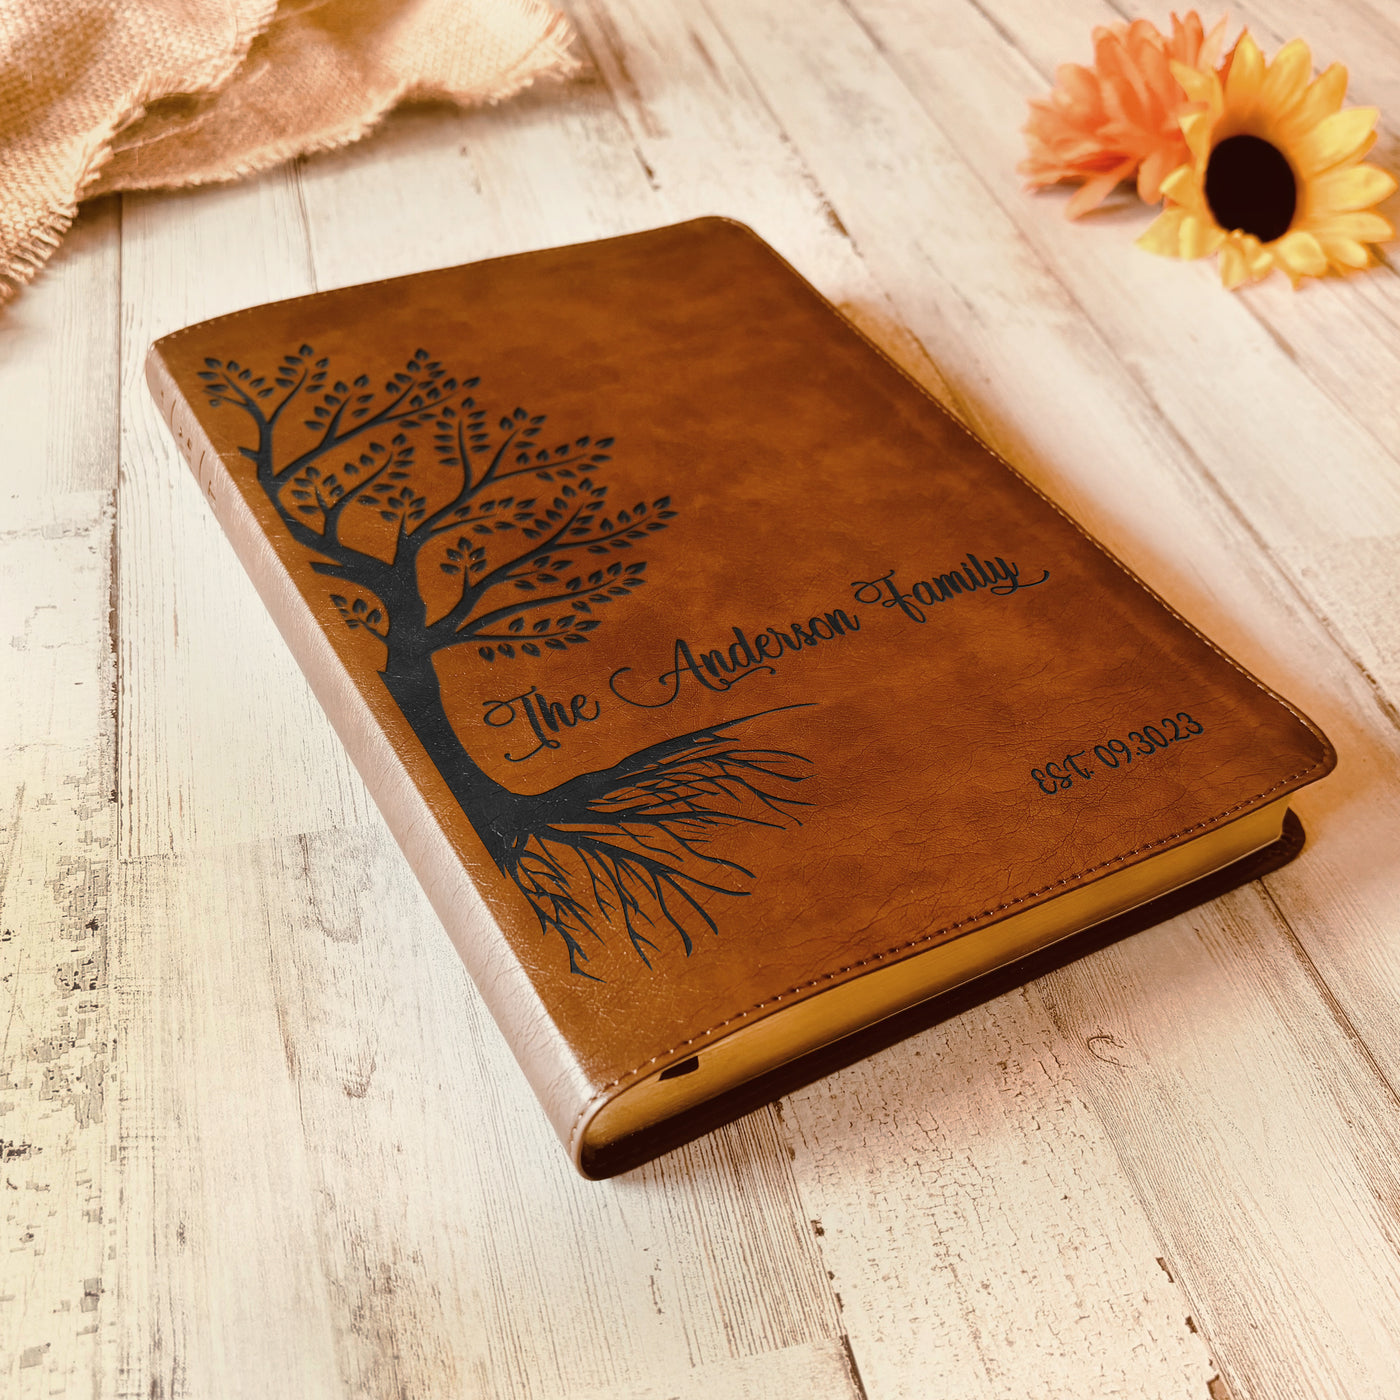 Personalized Family Bible | Custom NLT Family Tree Bible | Engraved Bible Wedding Bible | Christian Gifts Family Bible for Wedding